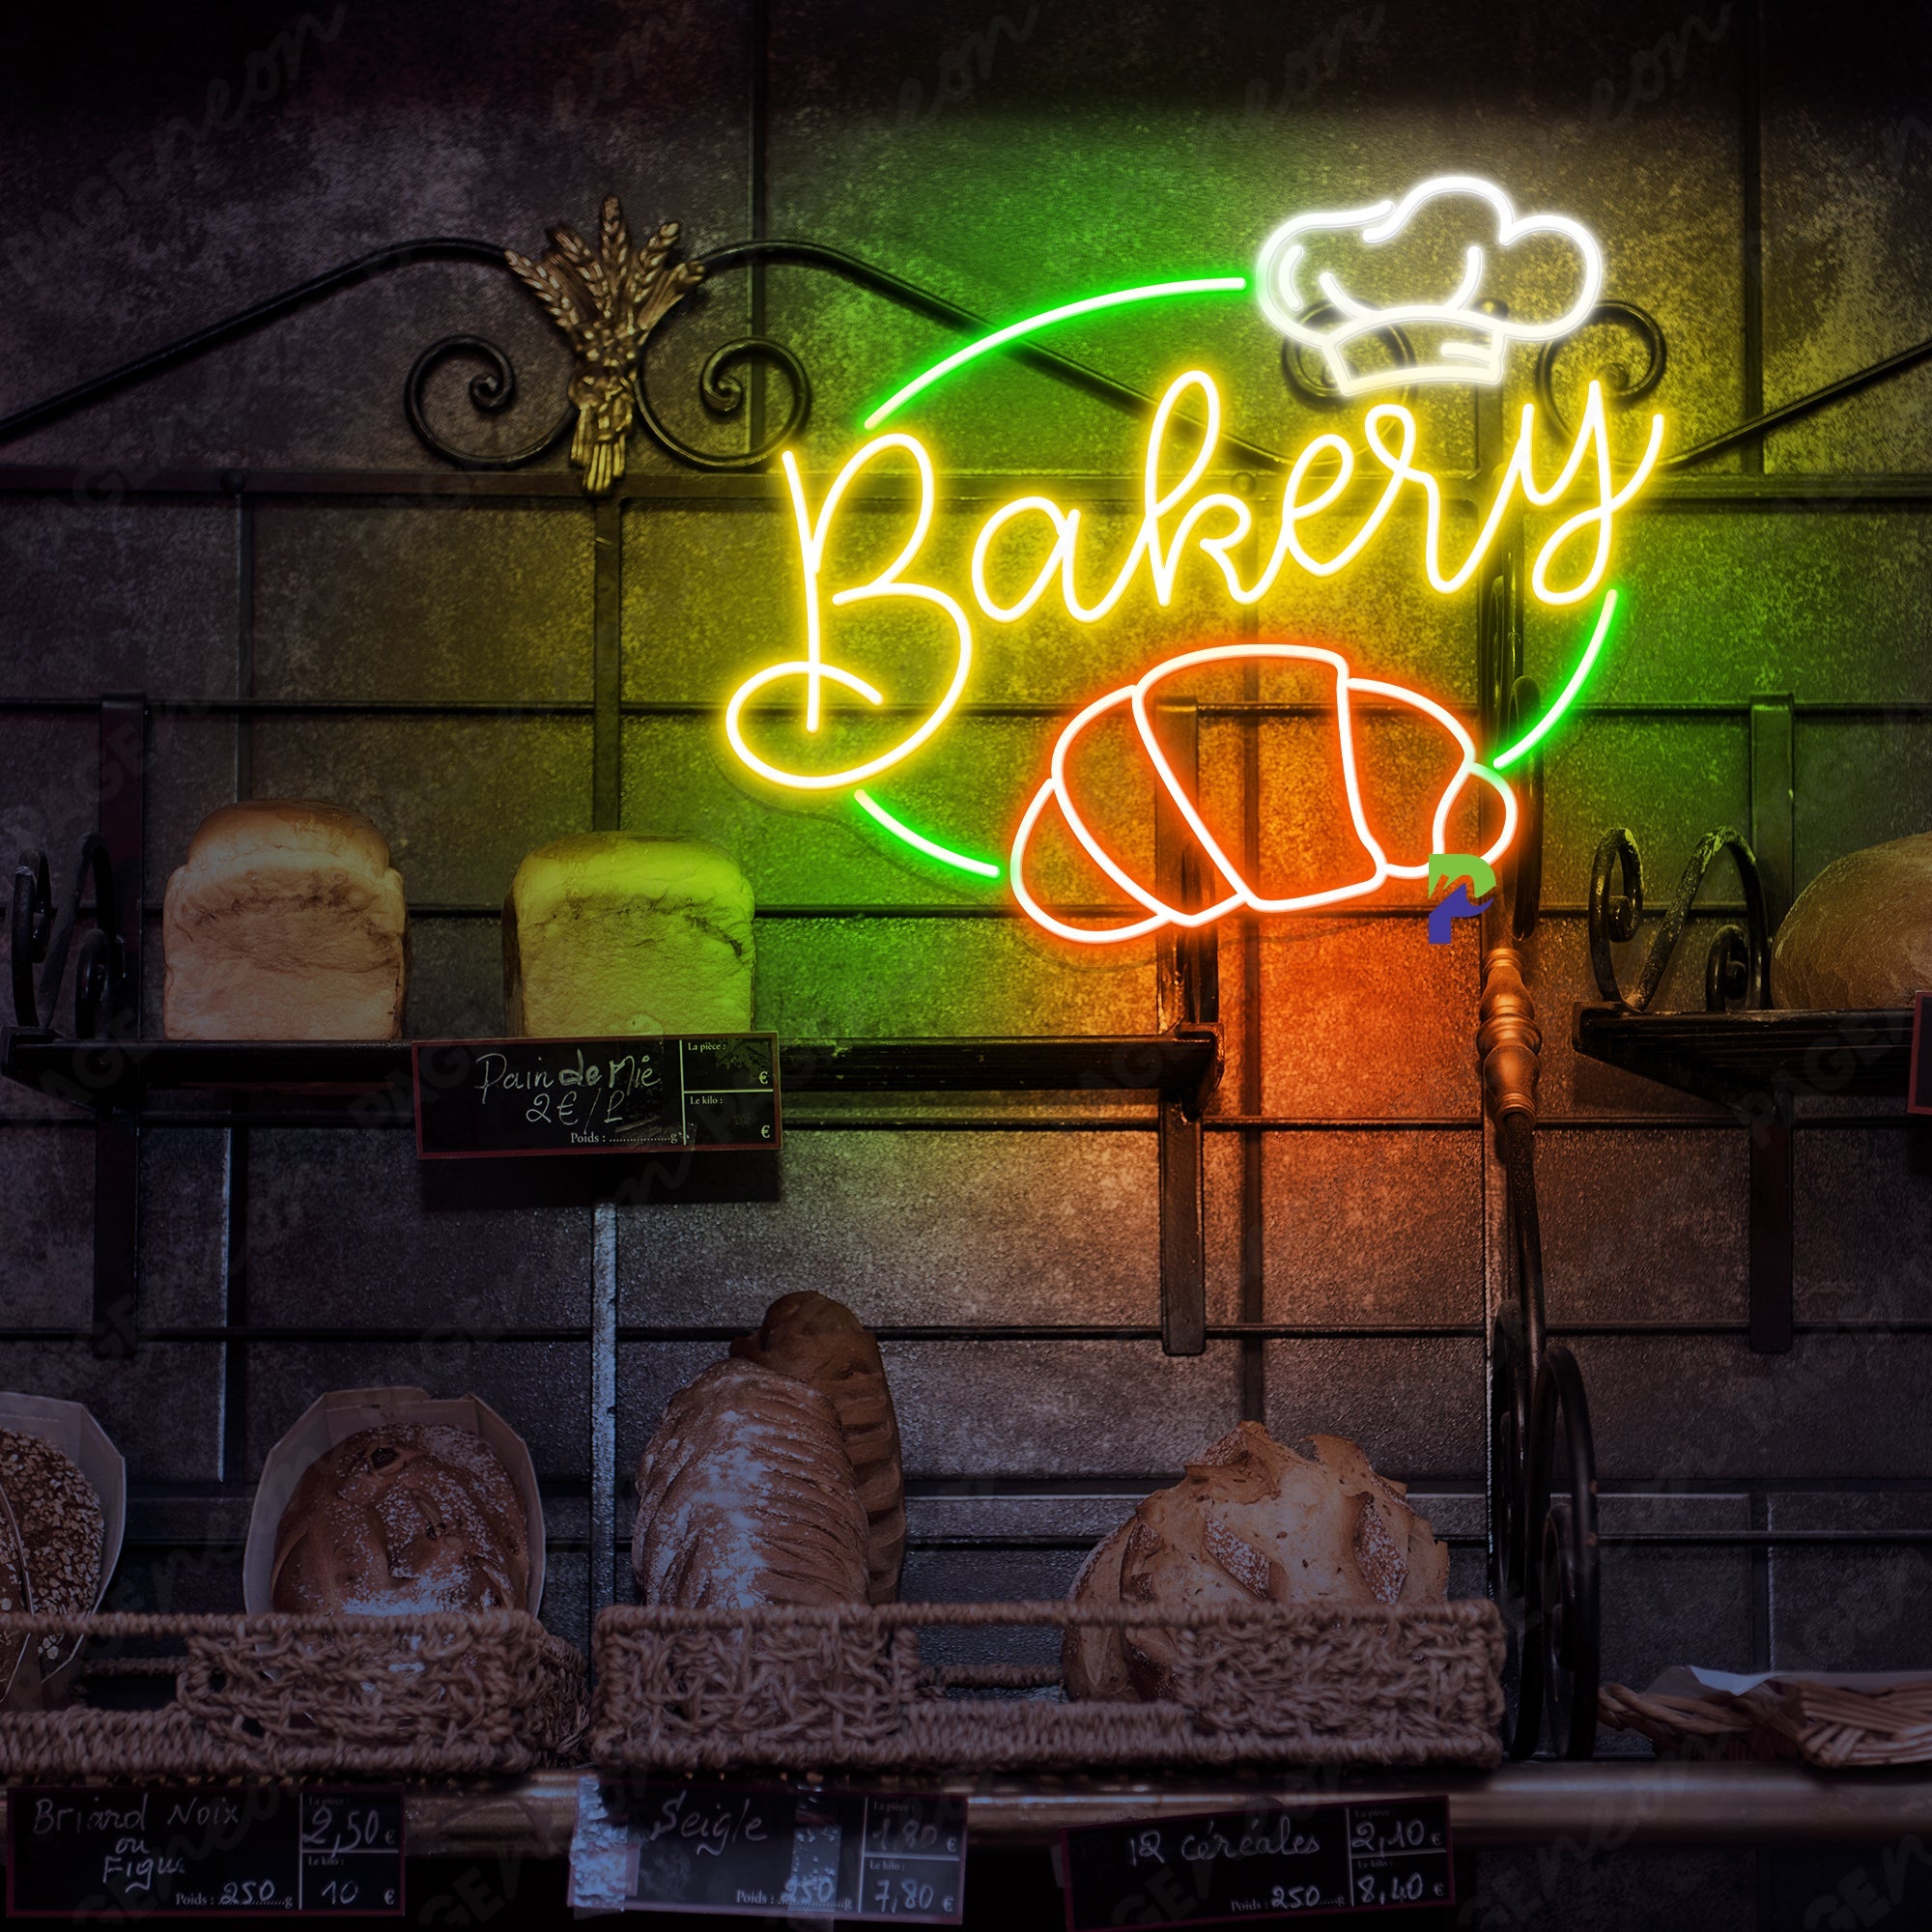 Neon Bakery Signs Croissant Bread Led Light